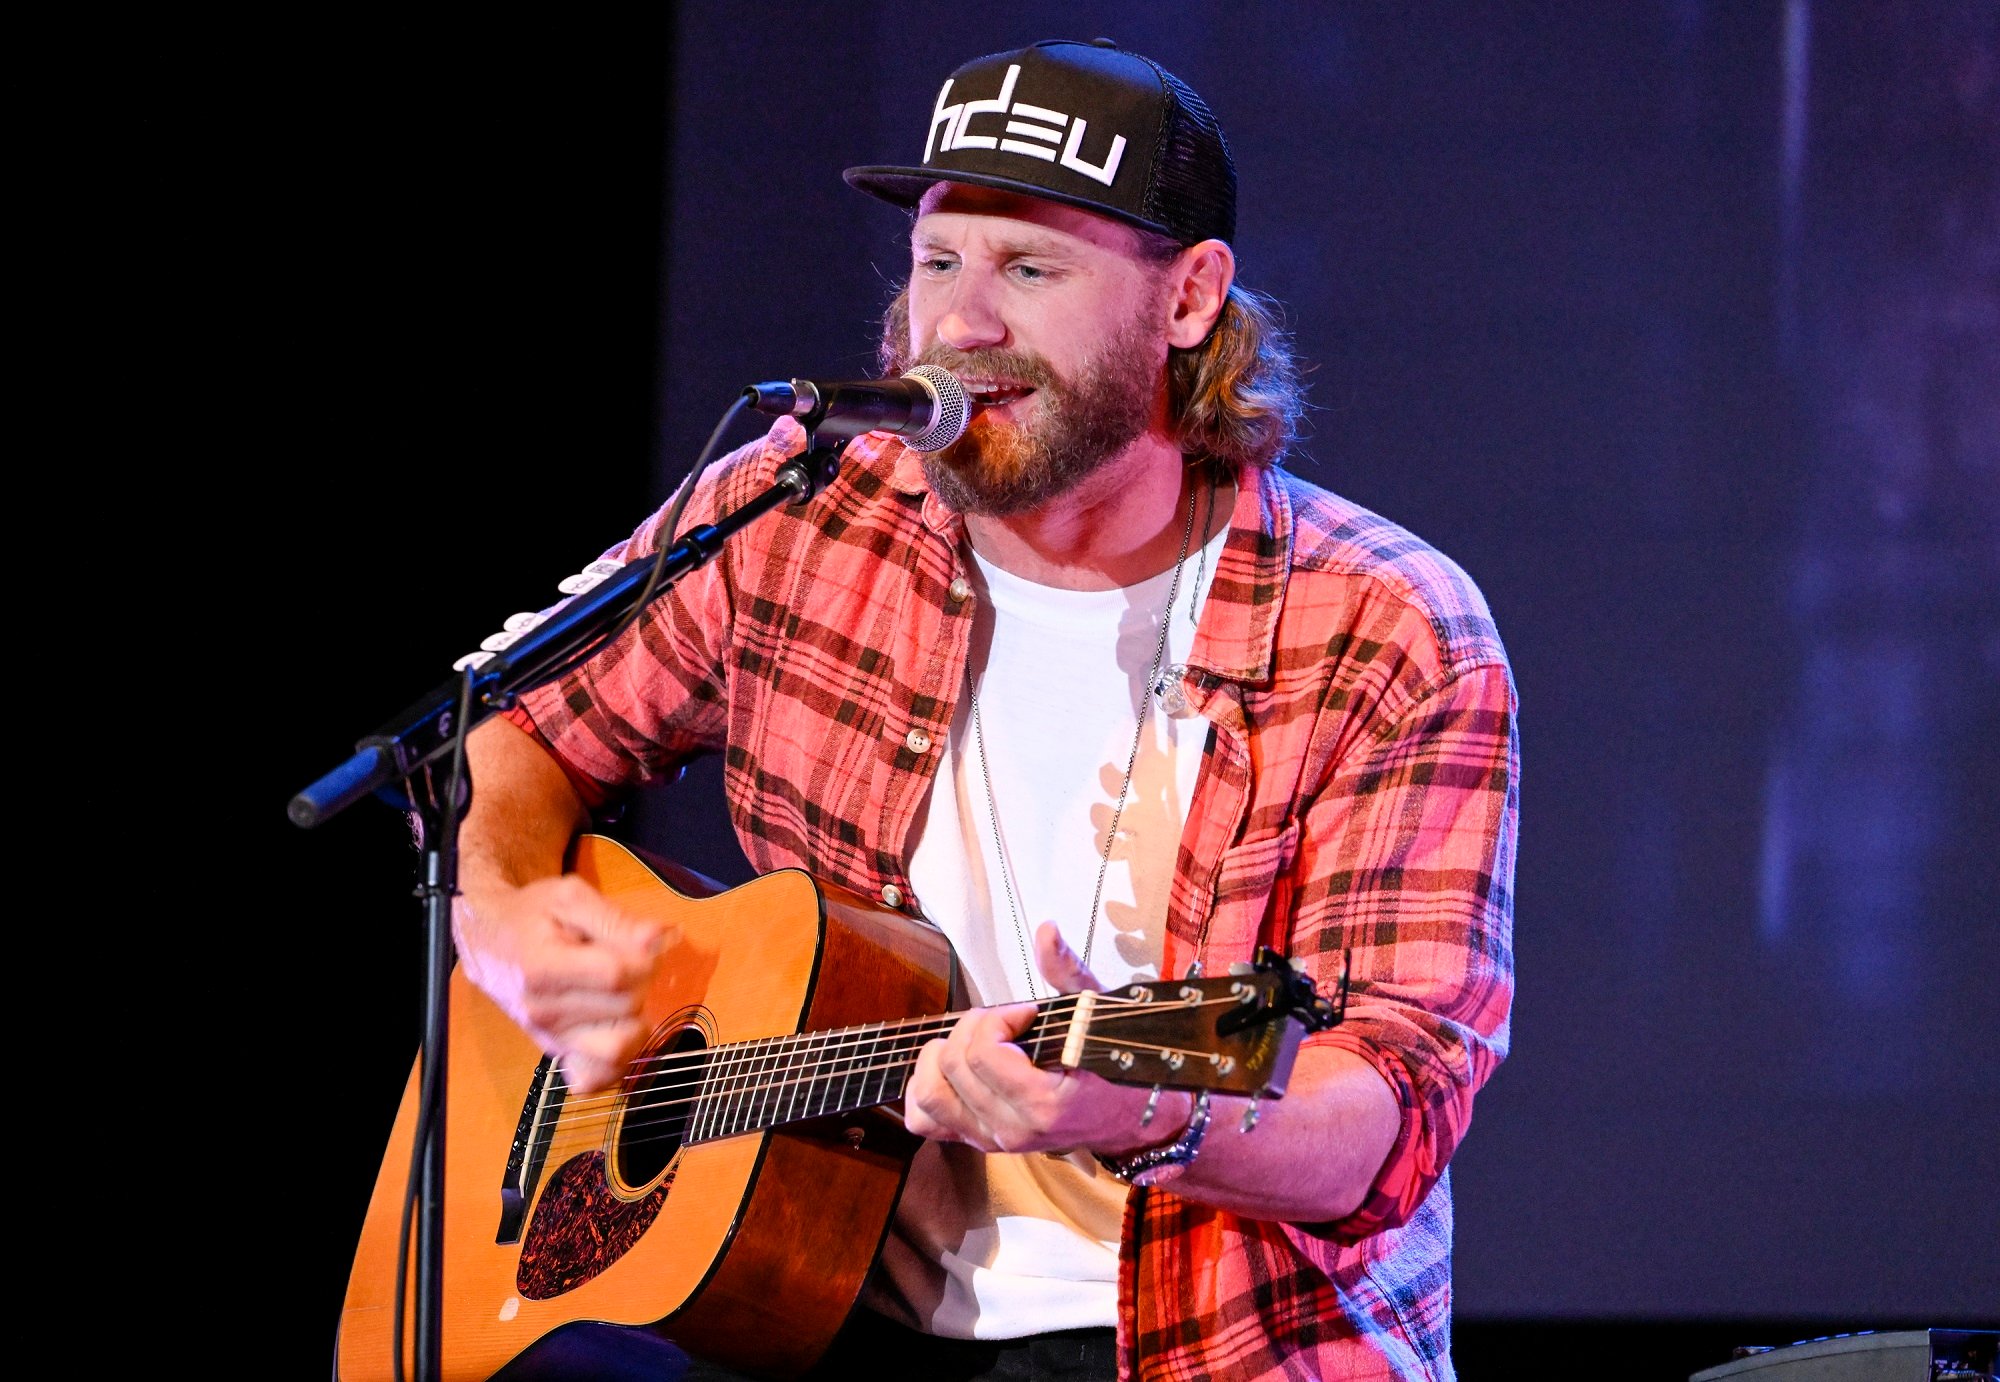 Chase Rice sings into a microphone while playing a guitar on stage